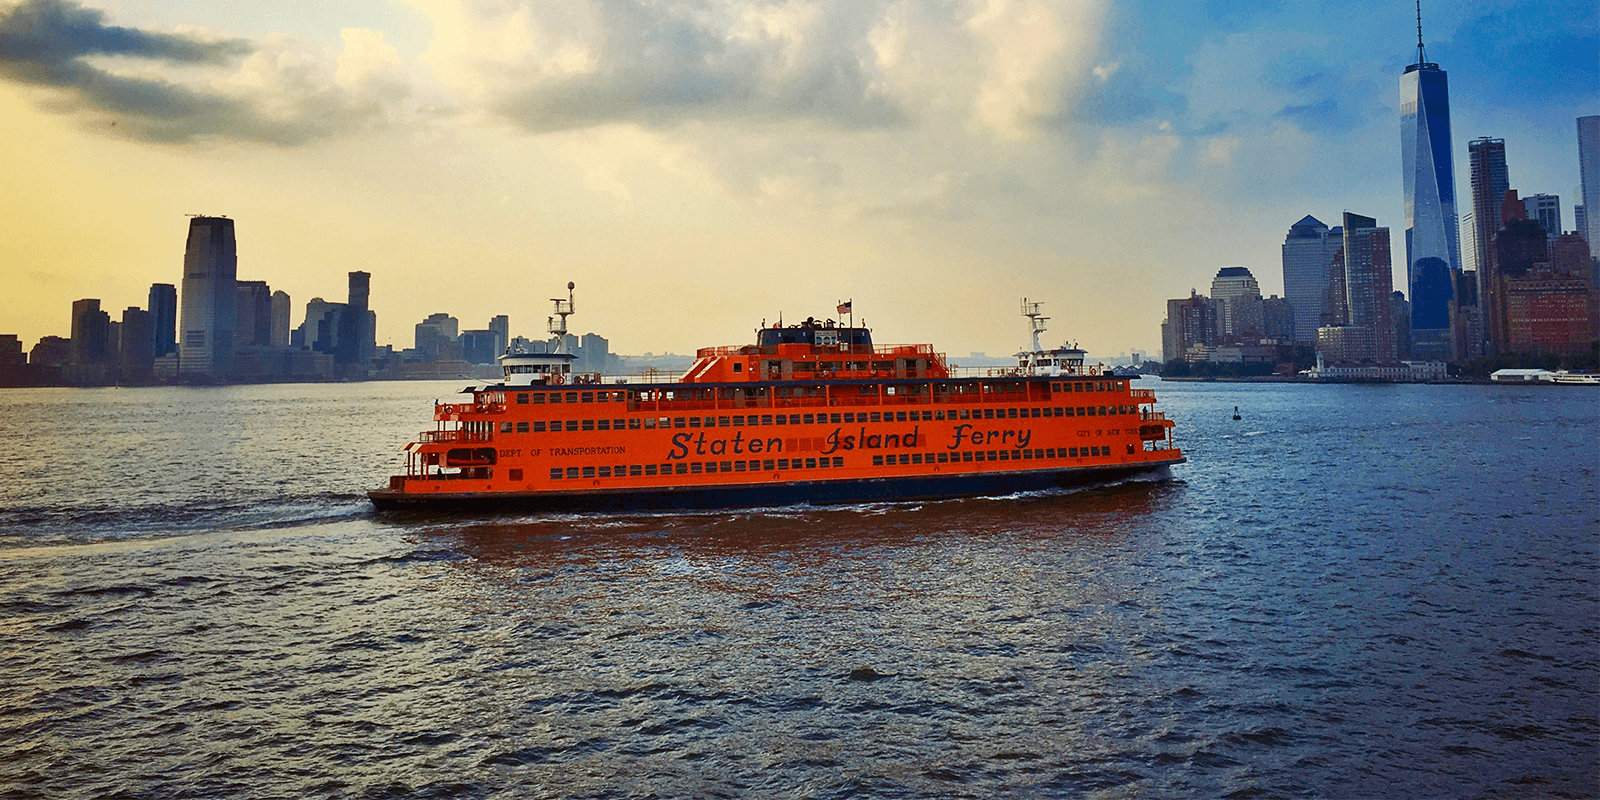 A Humble Engineer Keeps NYC’s Ferries Afloat